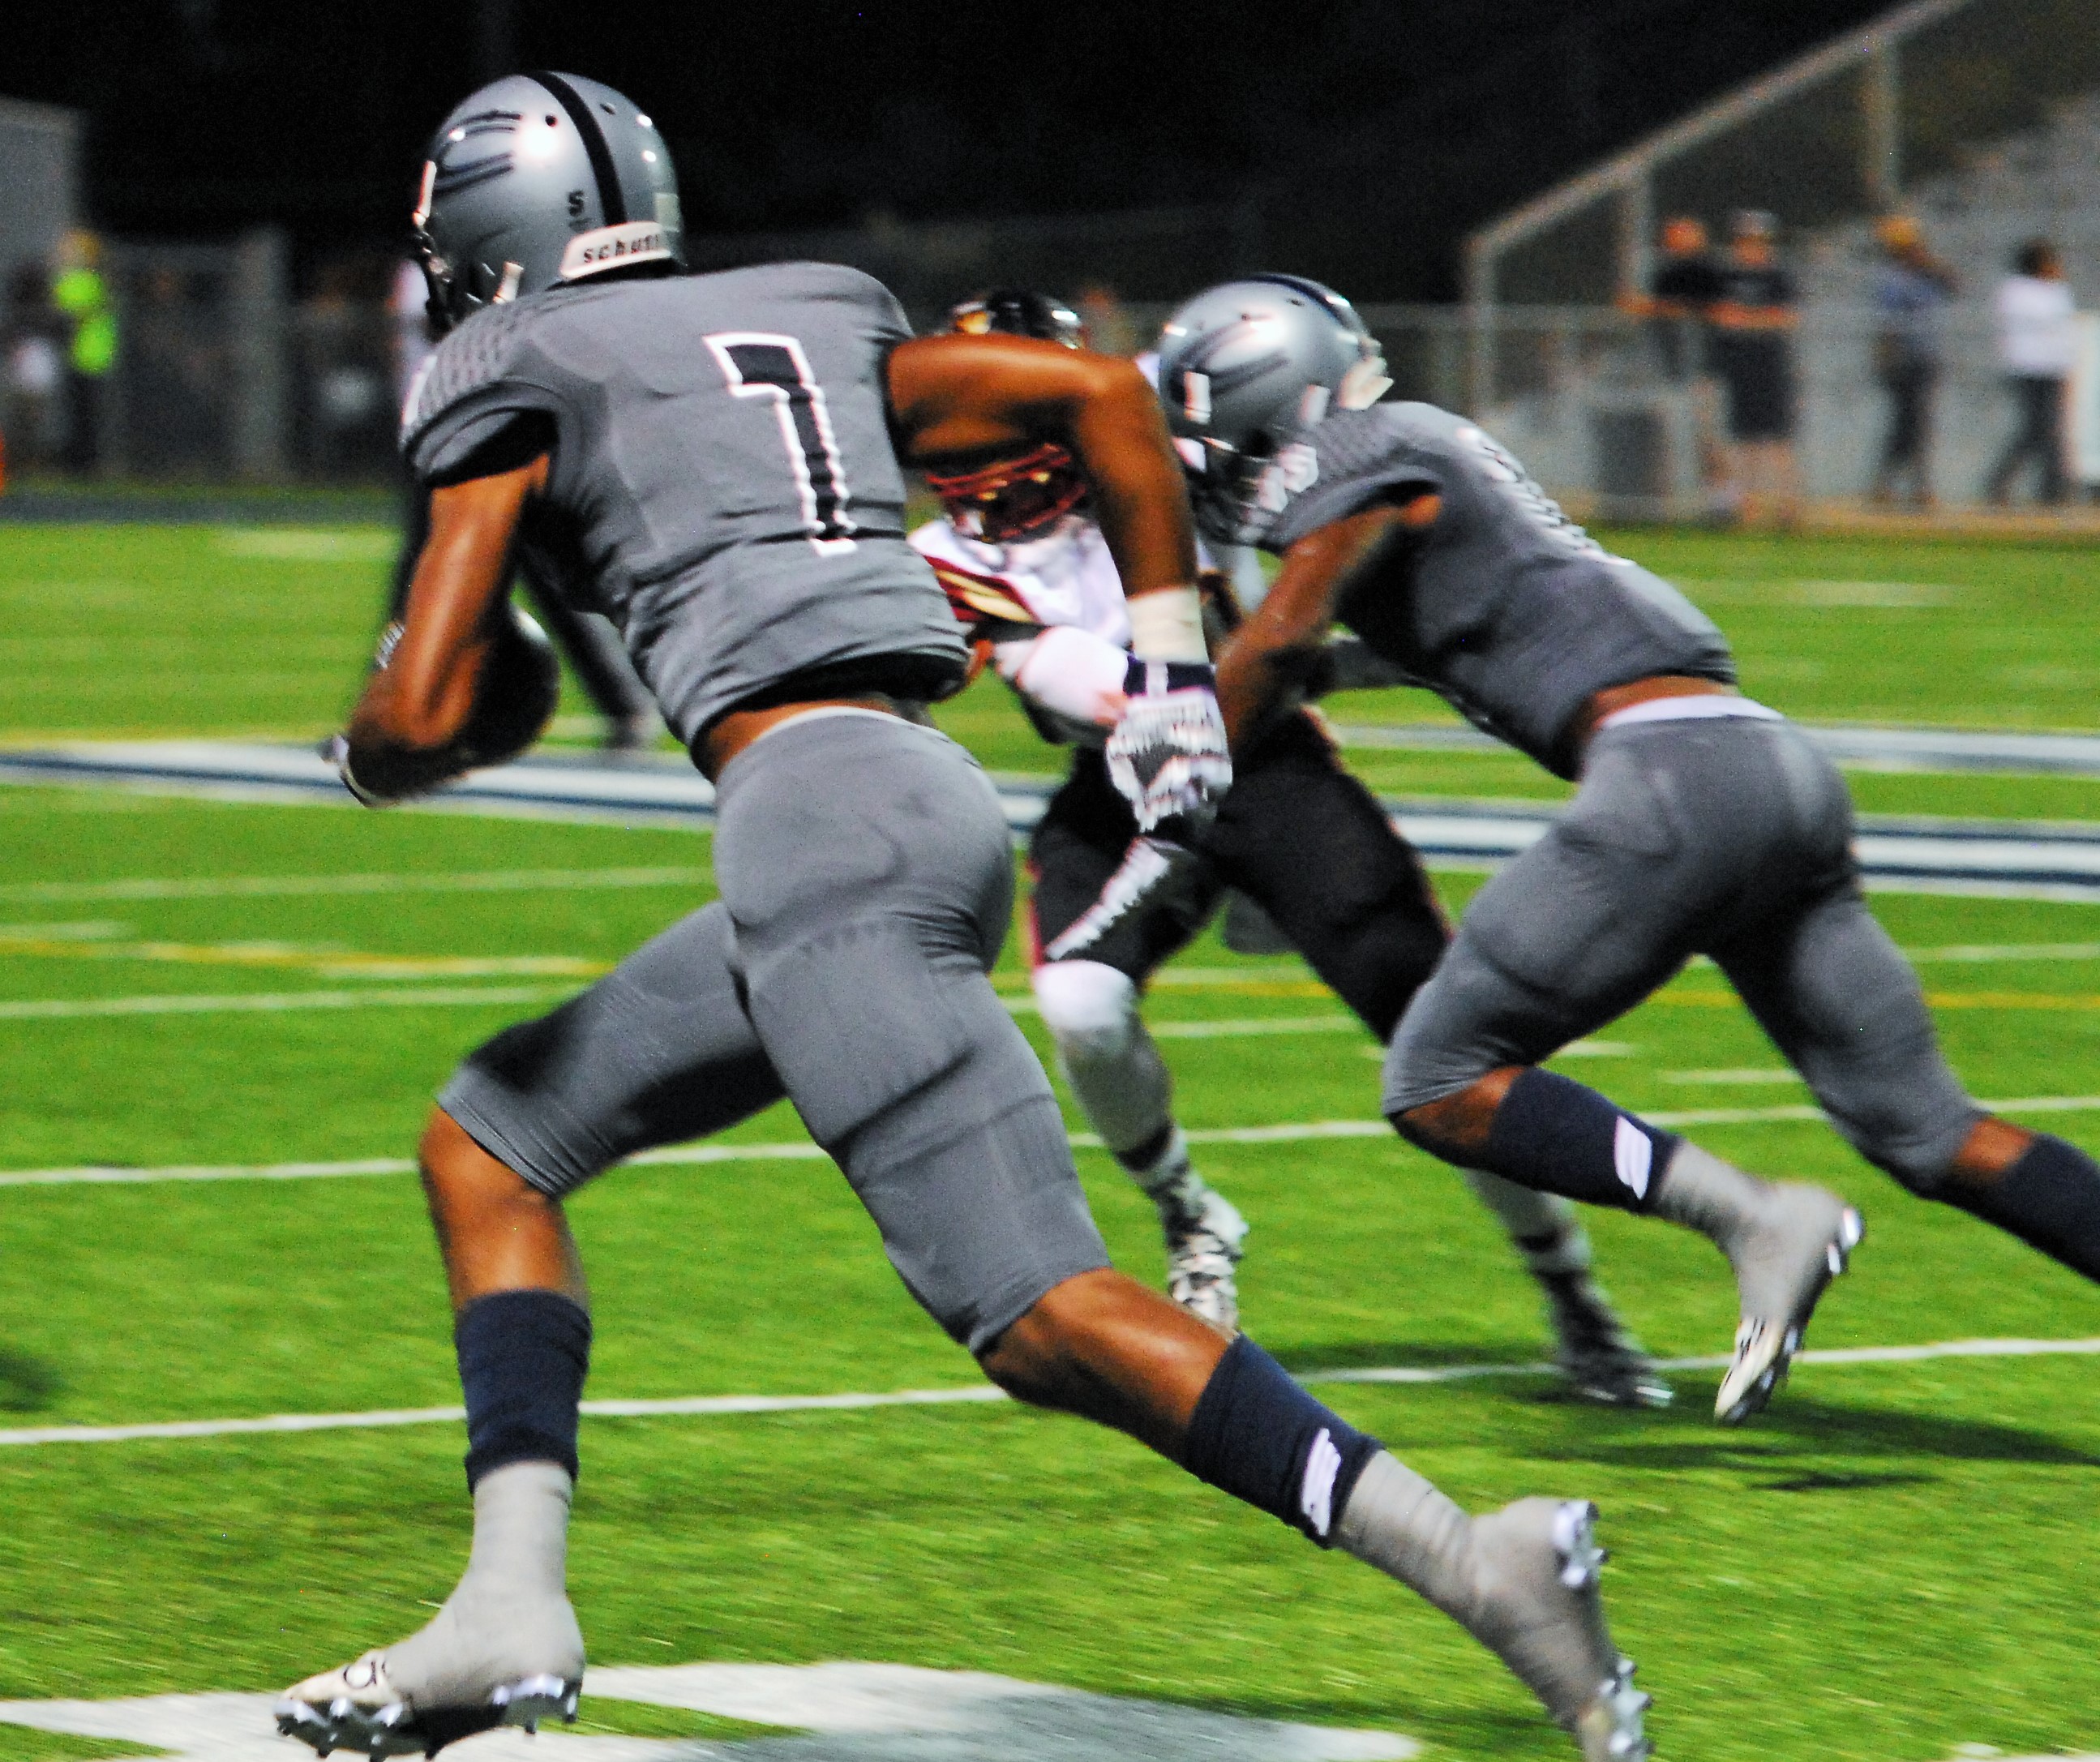 Pigrome unstoppable in Clay-Chalkville win over Shades Valley